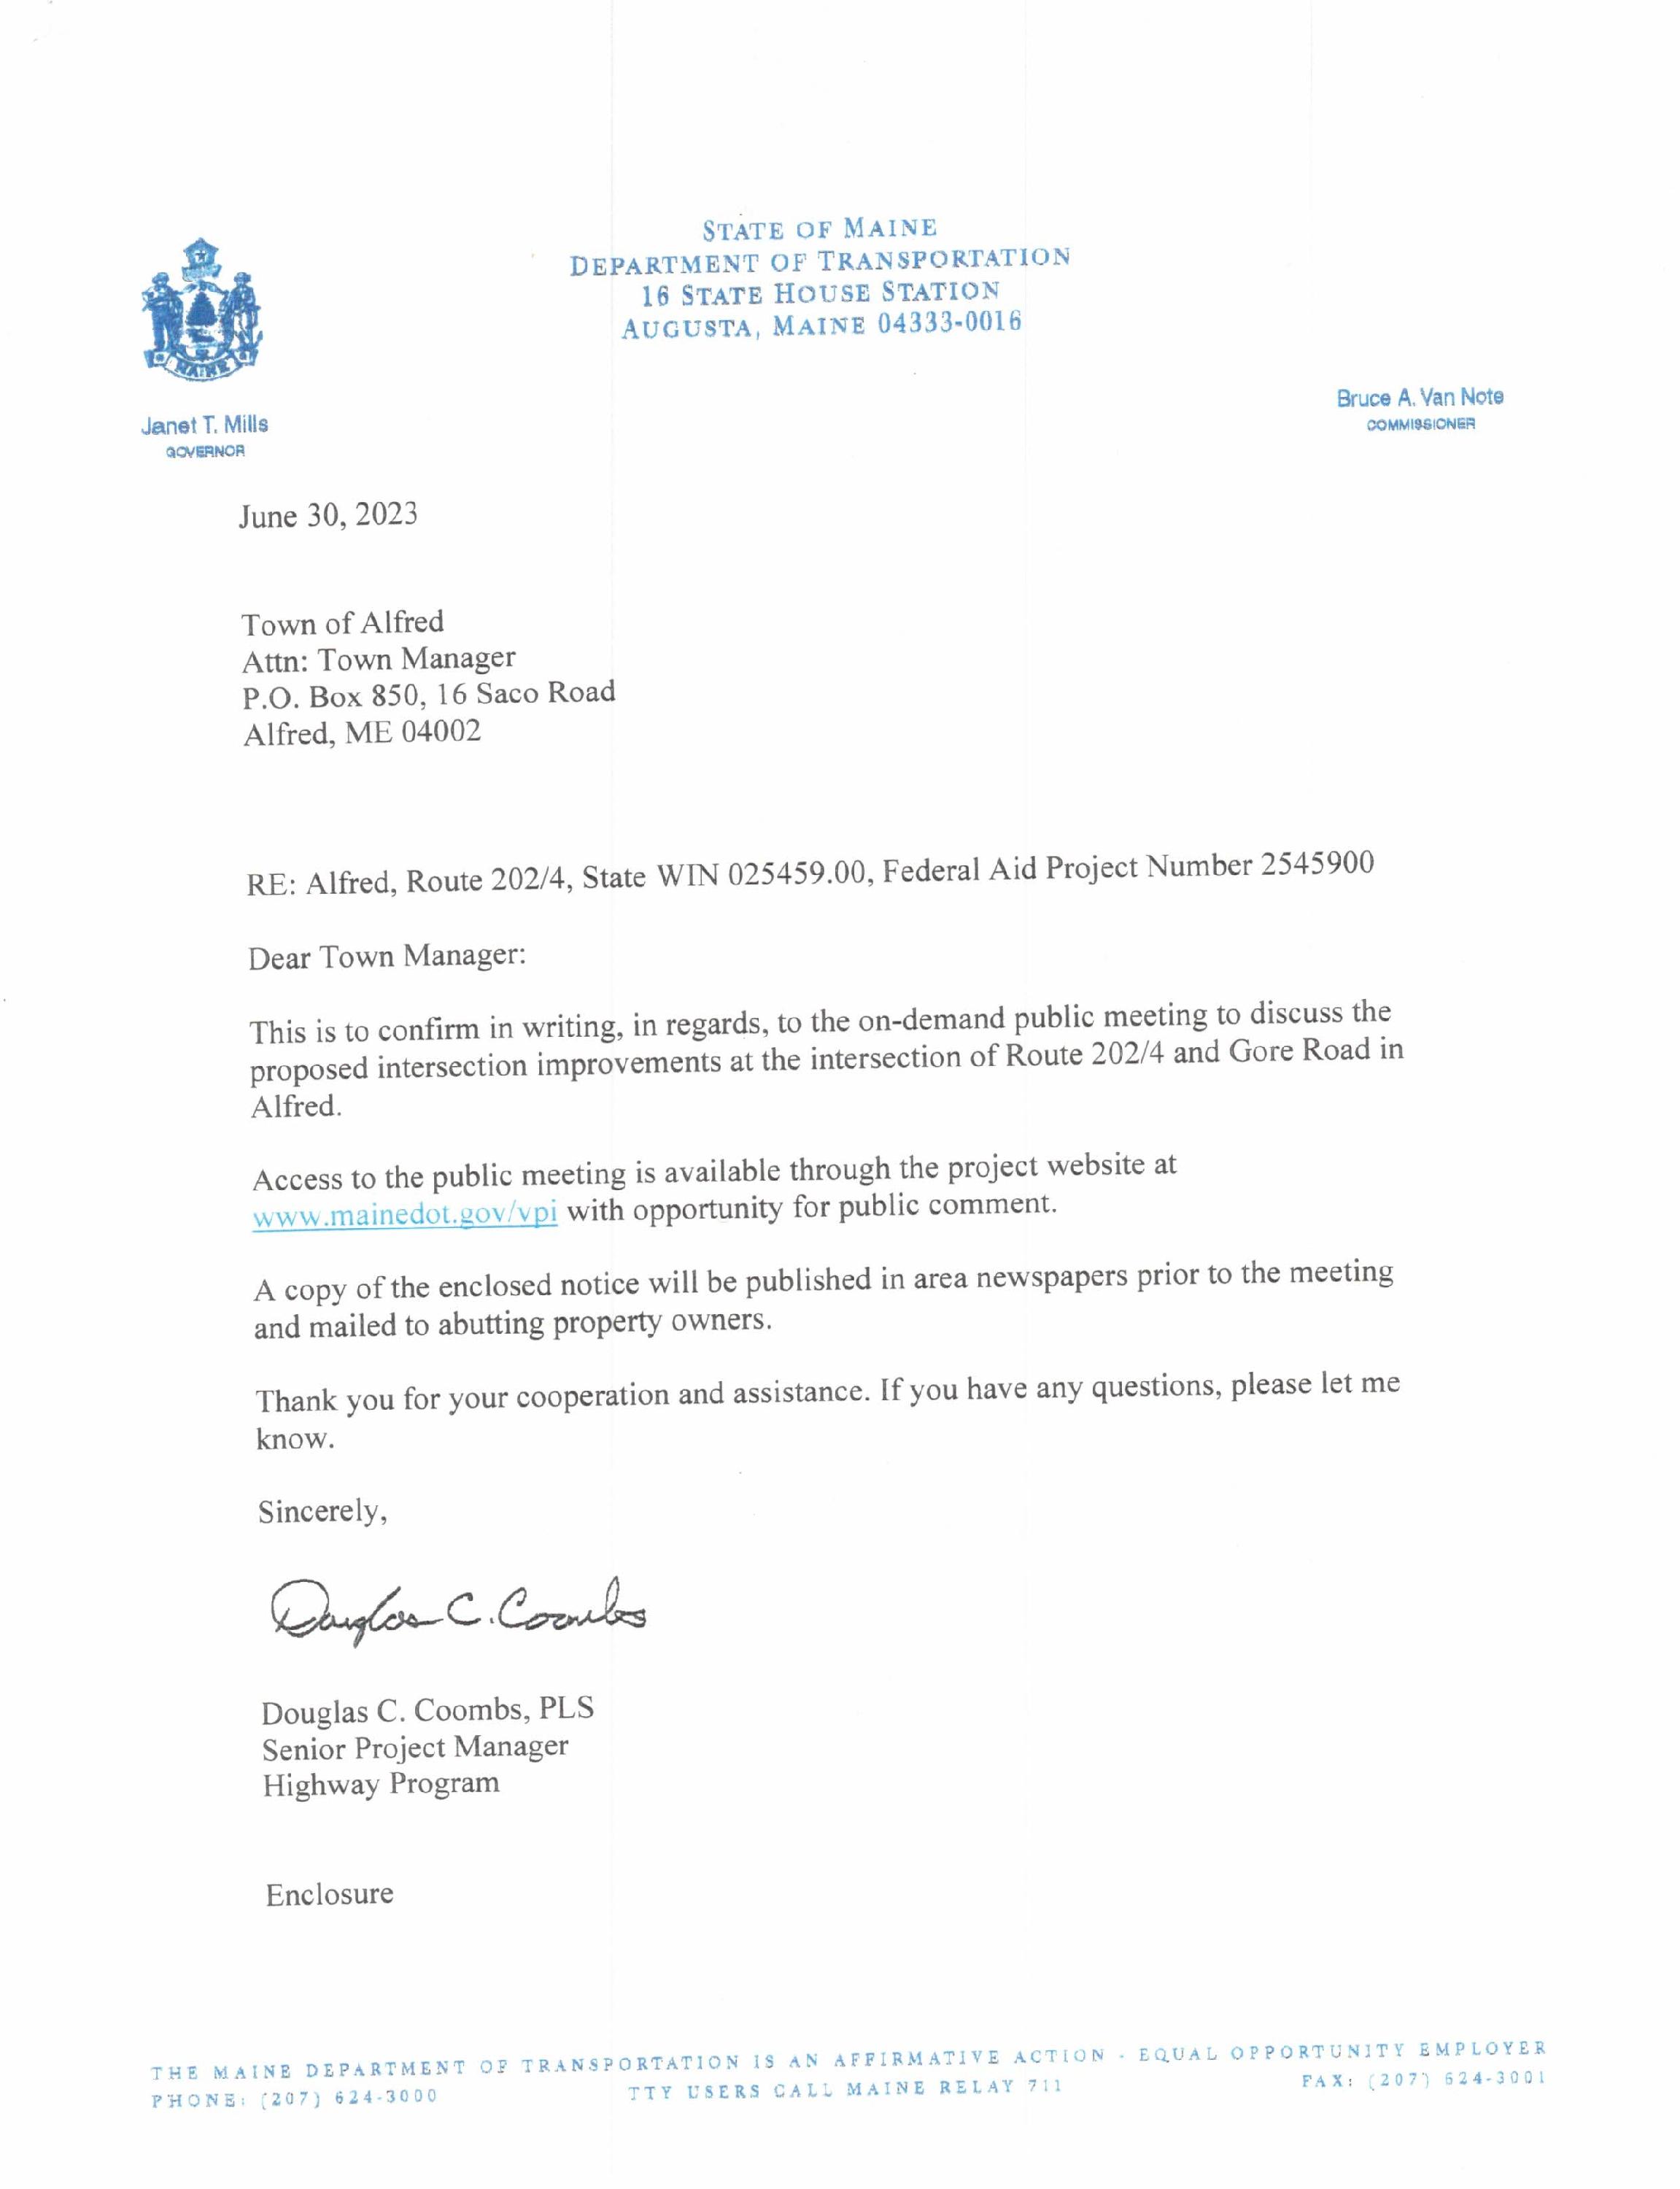 DOT letter Re improvements to 2024 & Gore Rd